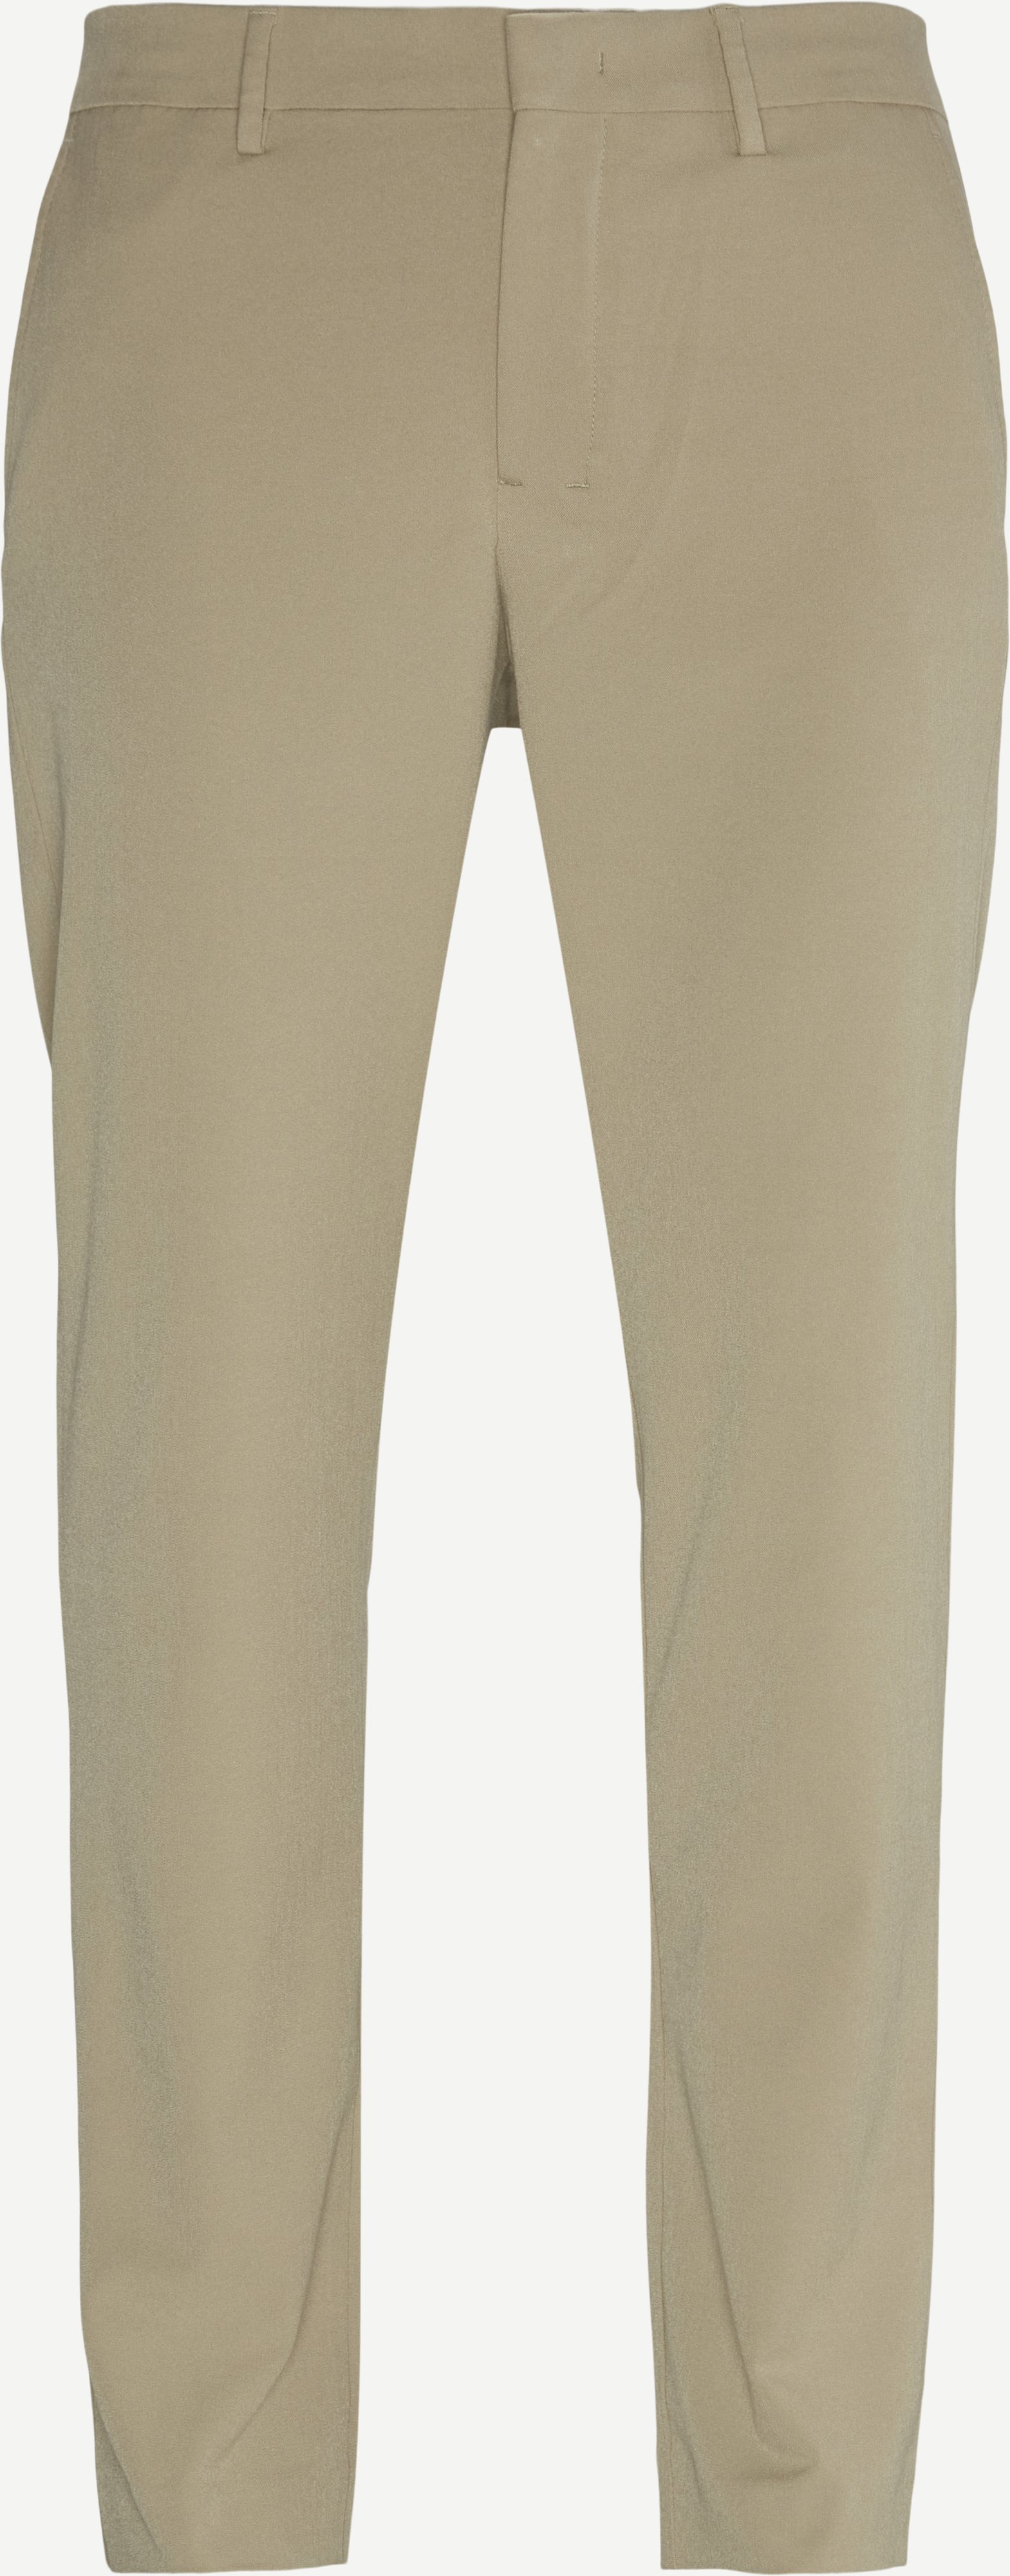 Cade Trousers - Trousers - Sand